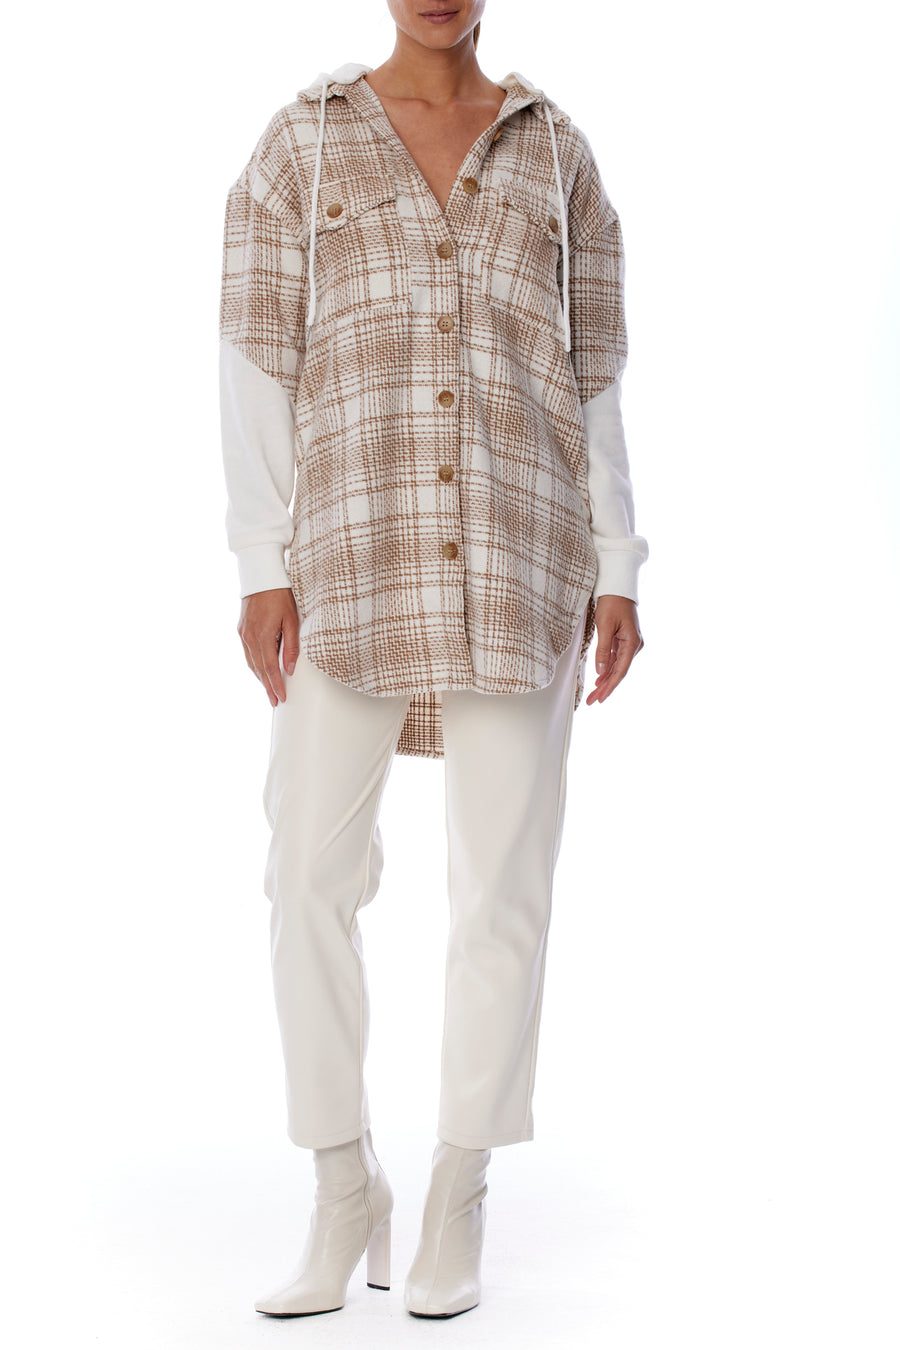 Cozy button up, coco and white plaid hoodie with shirttail hem, contrasting sleeve and front pockets